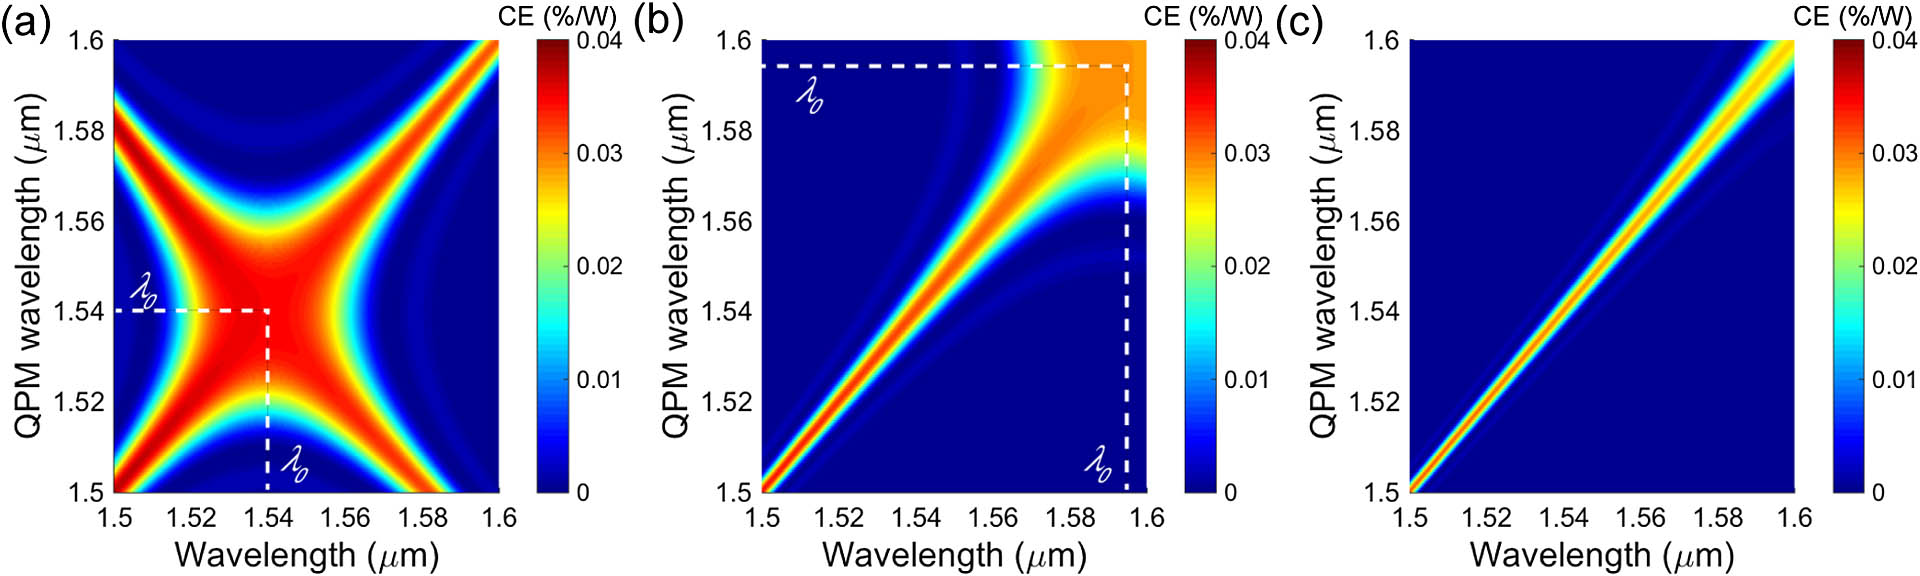 CE dependence on wavelength in waveguides having different QPM wavelengths. The waveguide height is 0.75 μm and widths are (a) 1.6 μm, (b) 1.8 μm, and (c) 2.0 μm. The plots consider TE polarized light; the grating length Lg is 10 mm and χeff(2) is 0.1 pm/V. λ0 indicates the wavelength at which condition by Eq. (3) is satisfied.